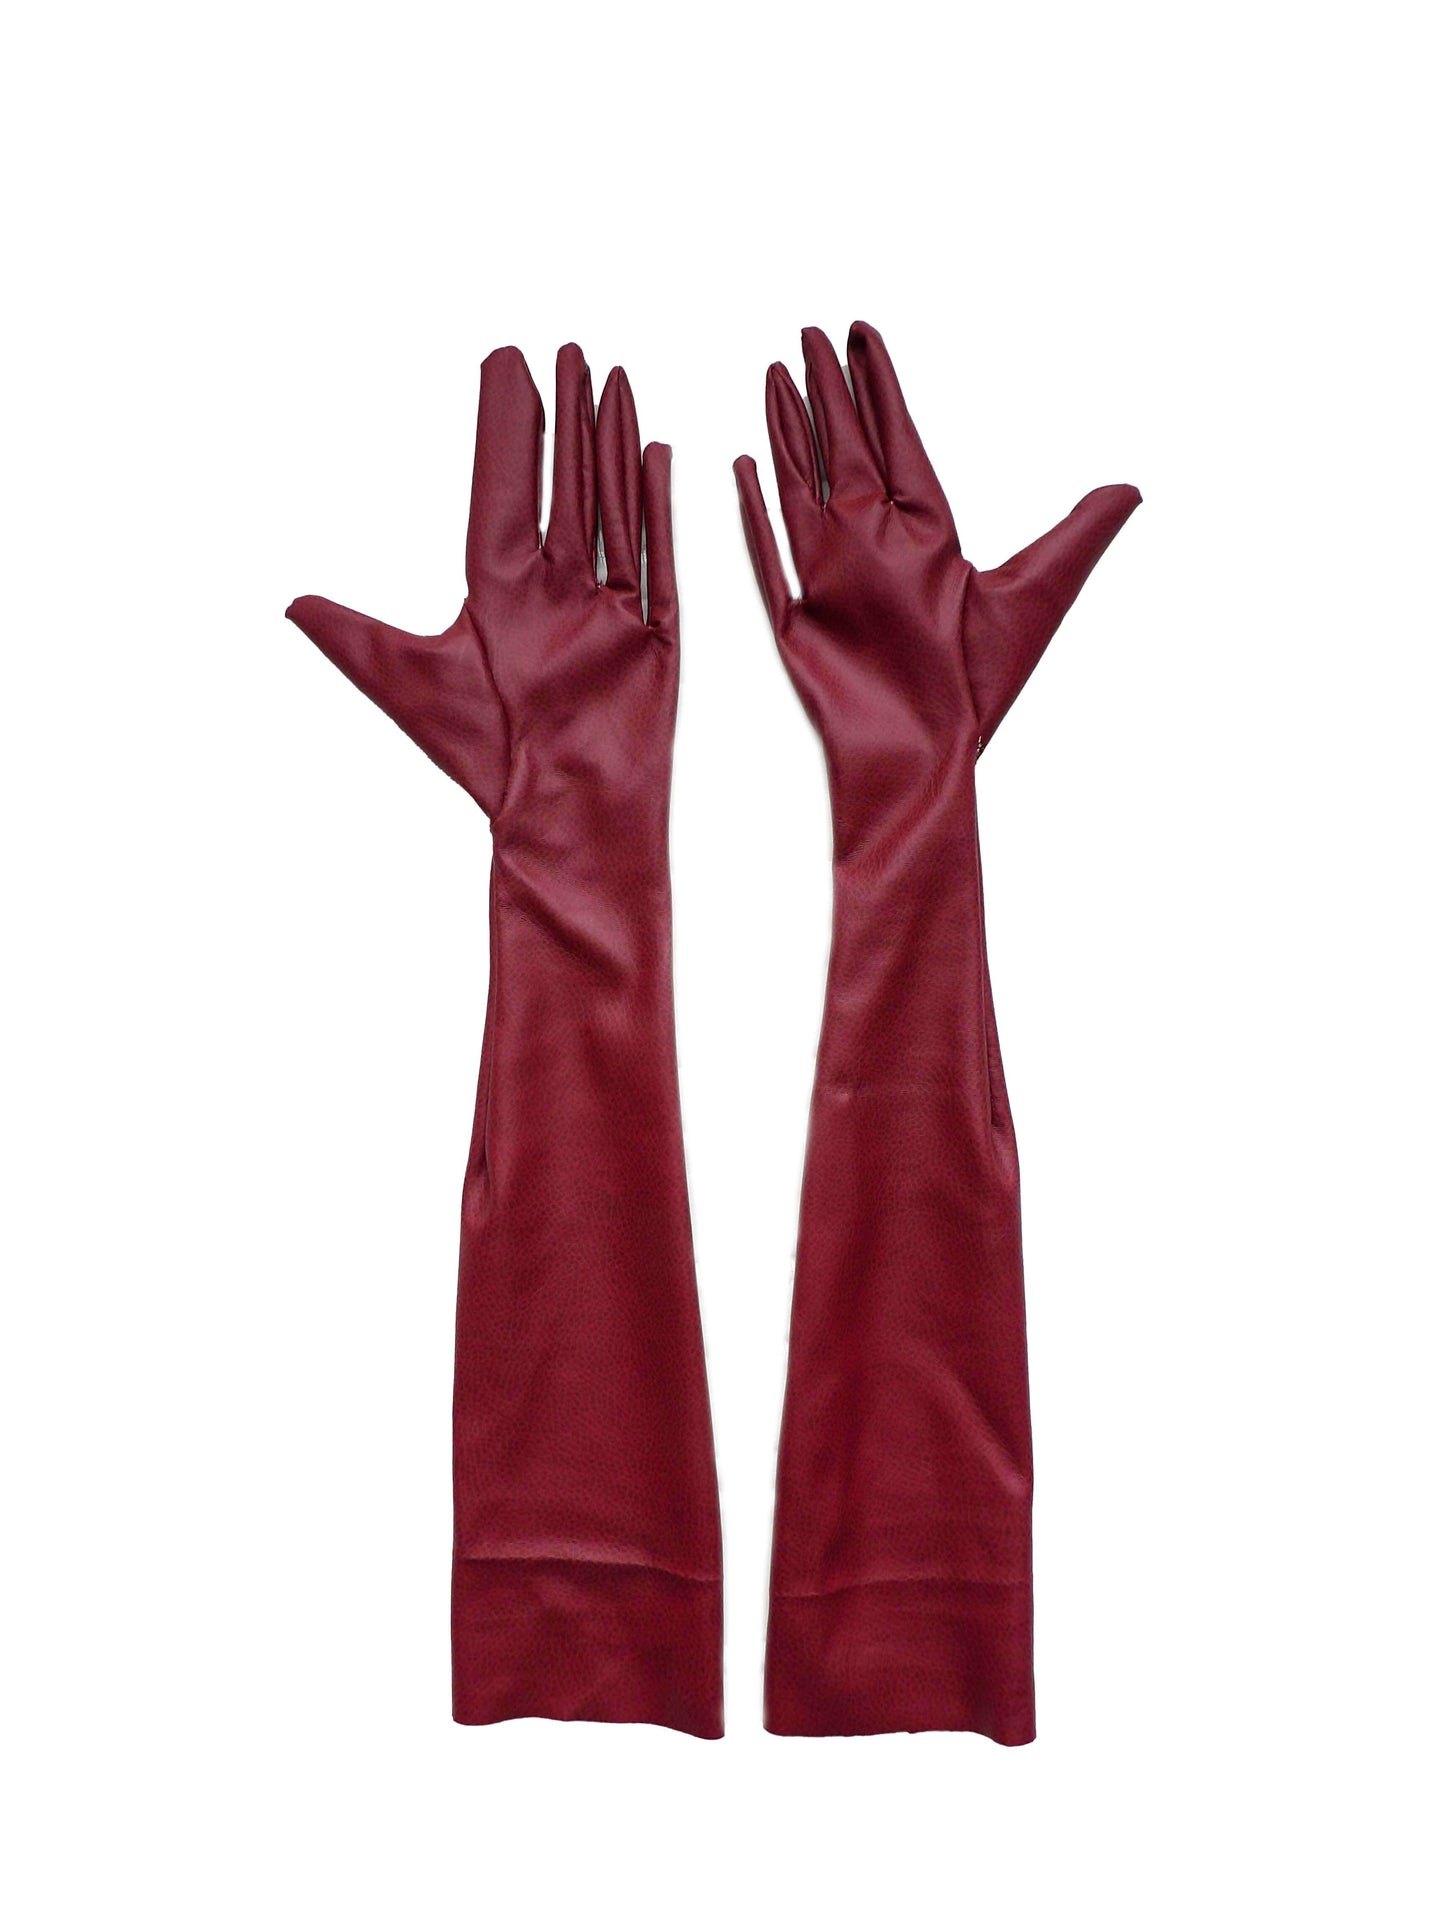 Faux Leather Opera Length Gloves in Burgundy Matte